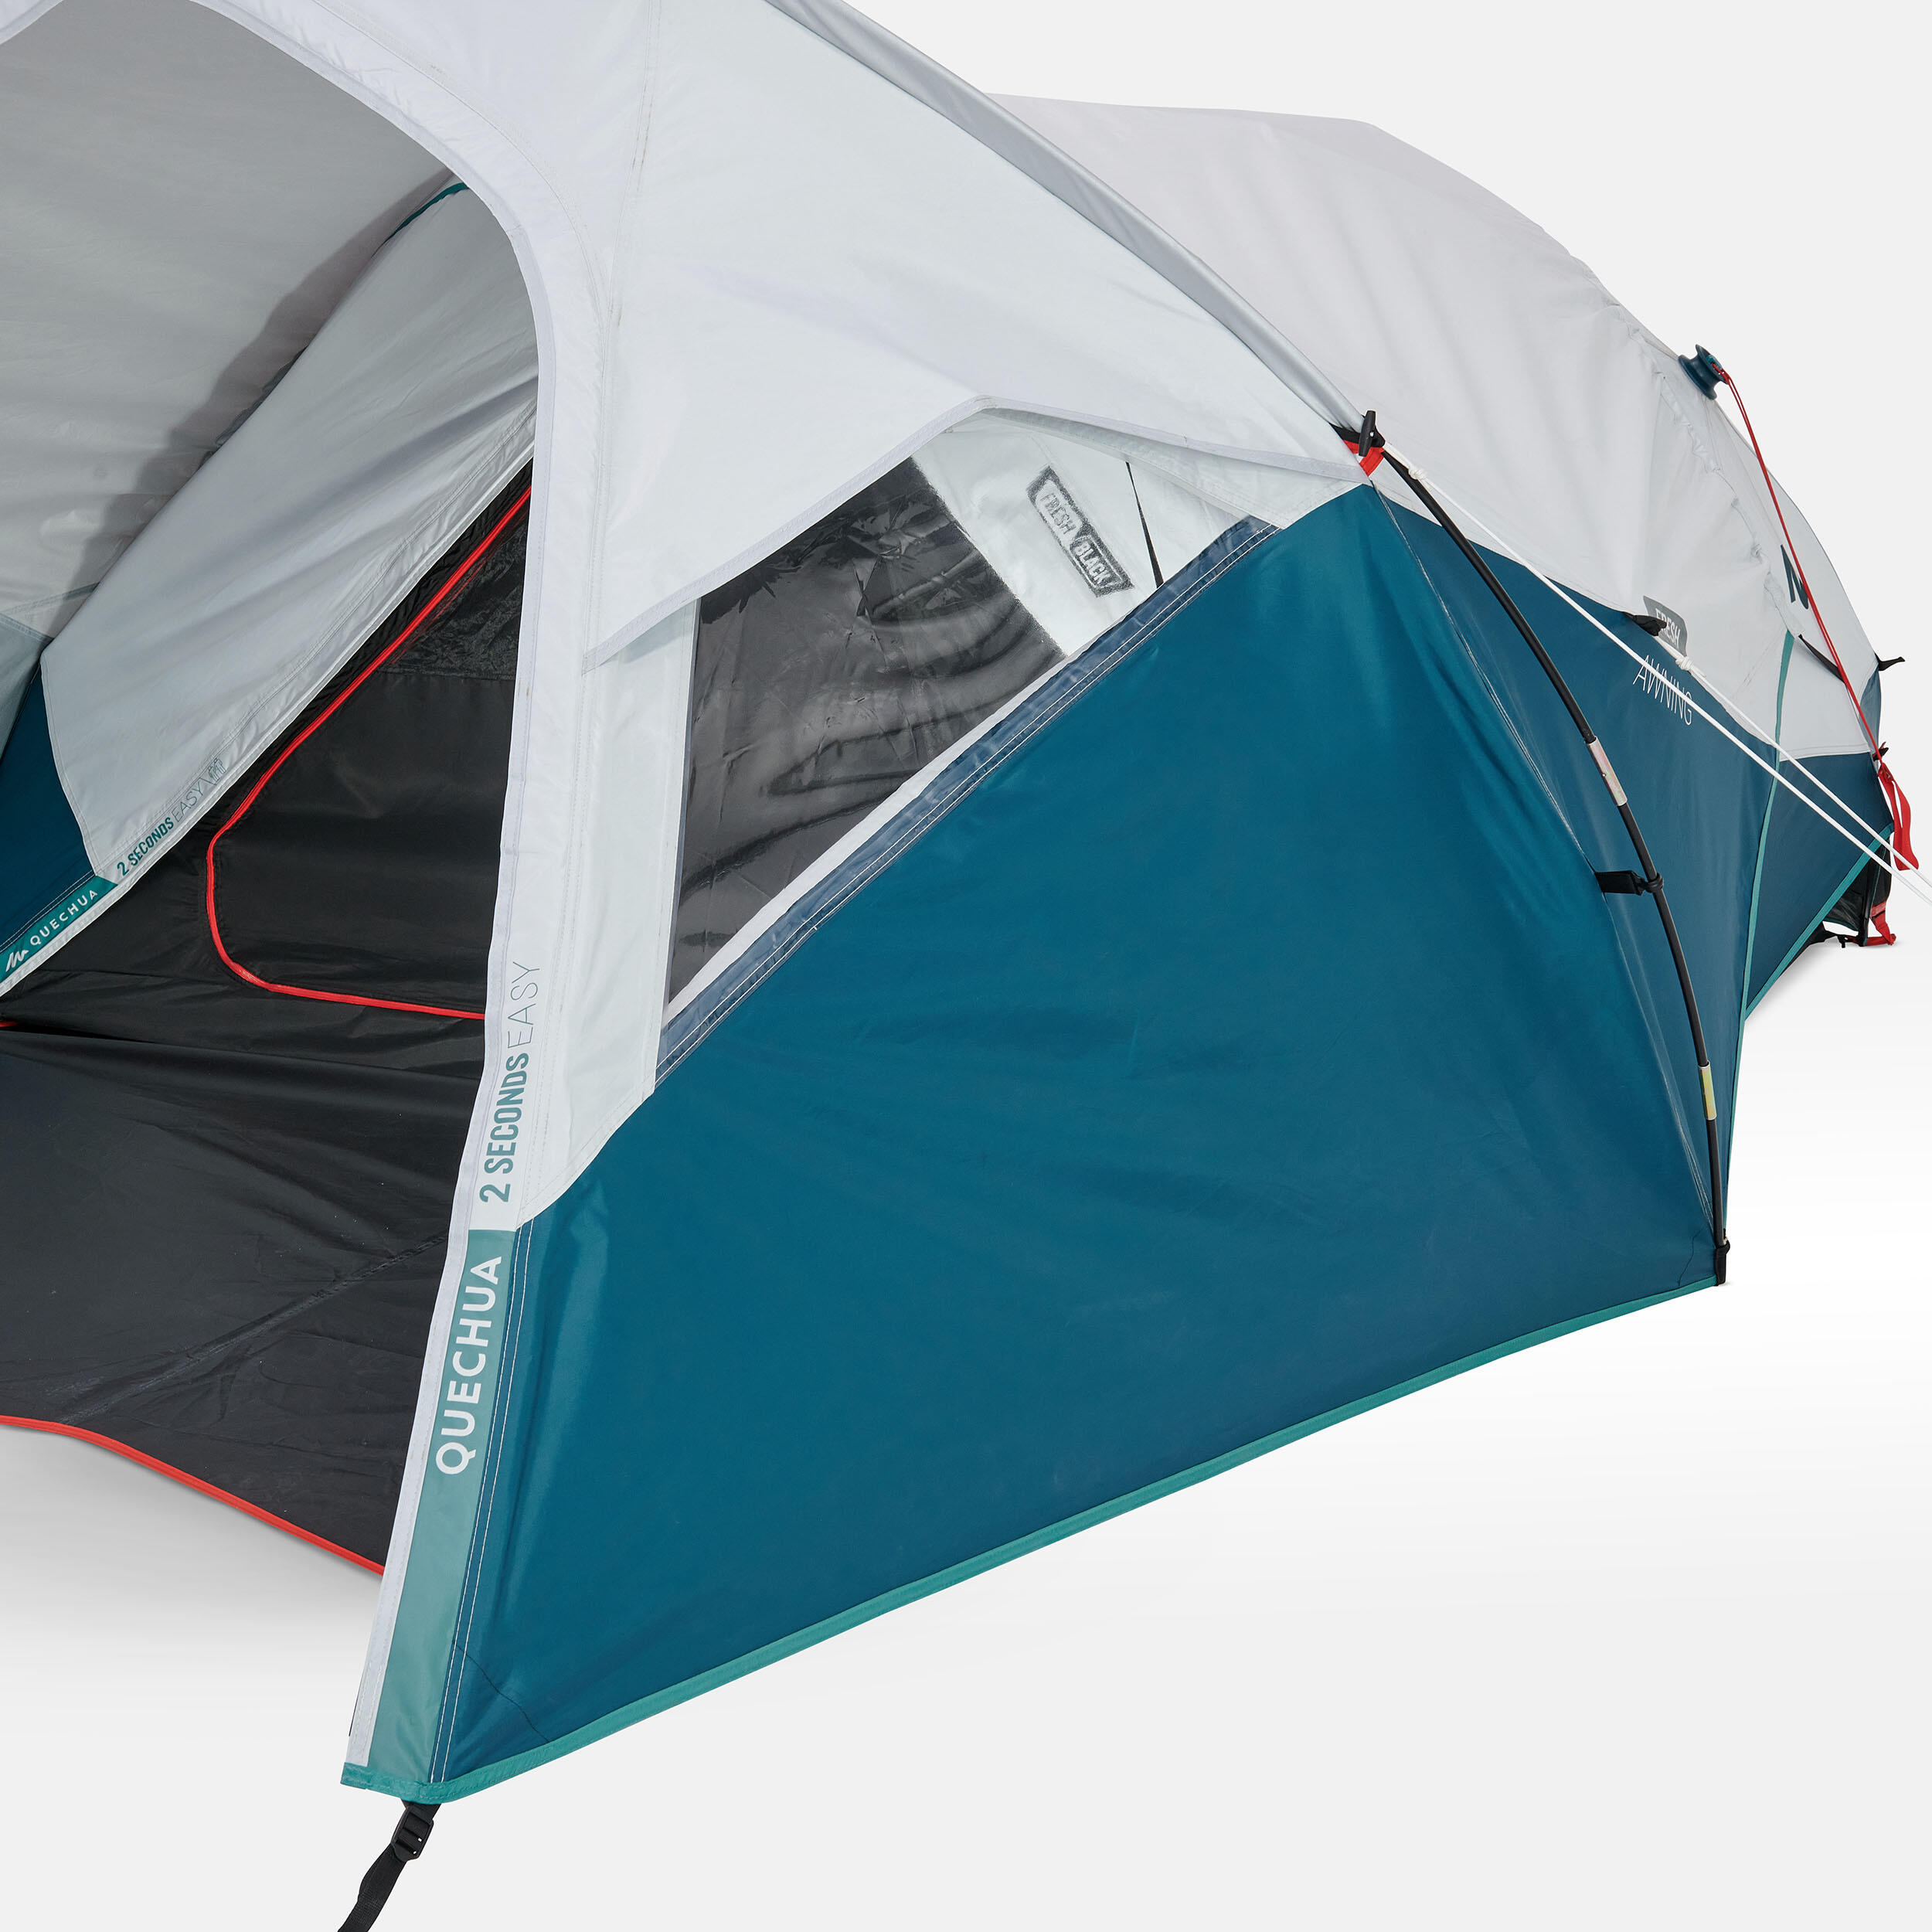 Camping awning - 2 Seconds EASY - Fresh 8/20